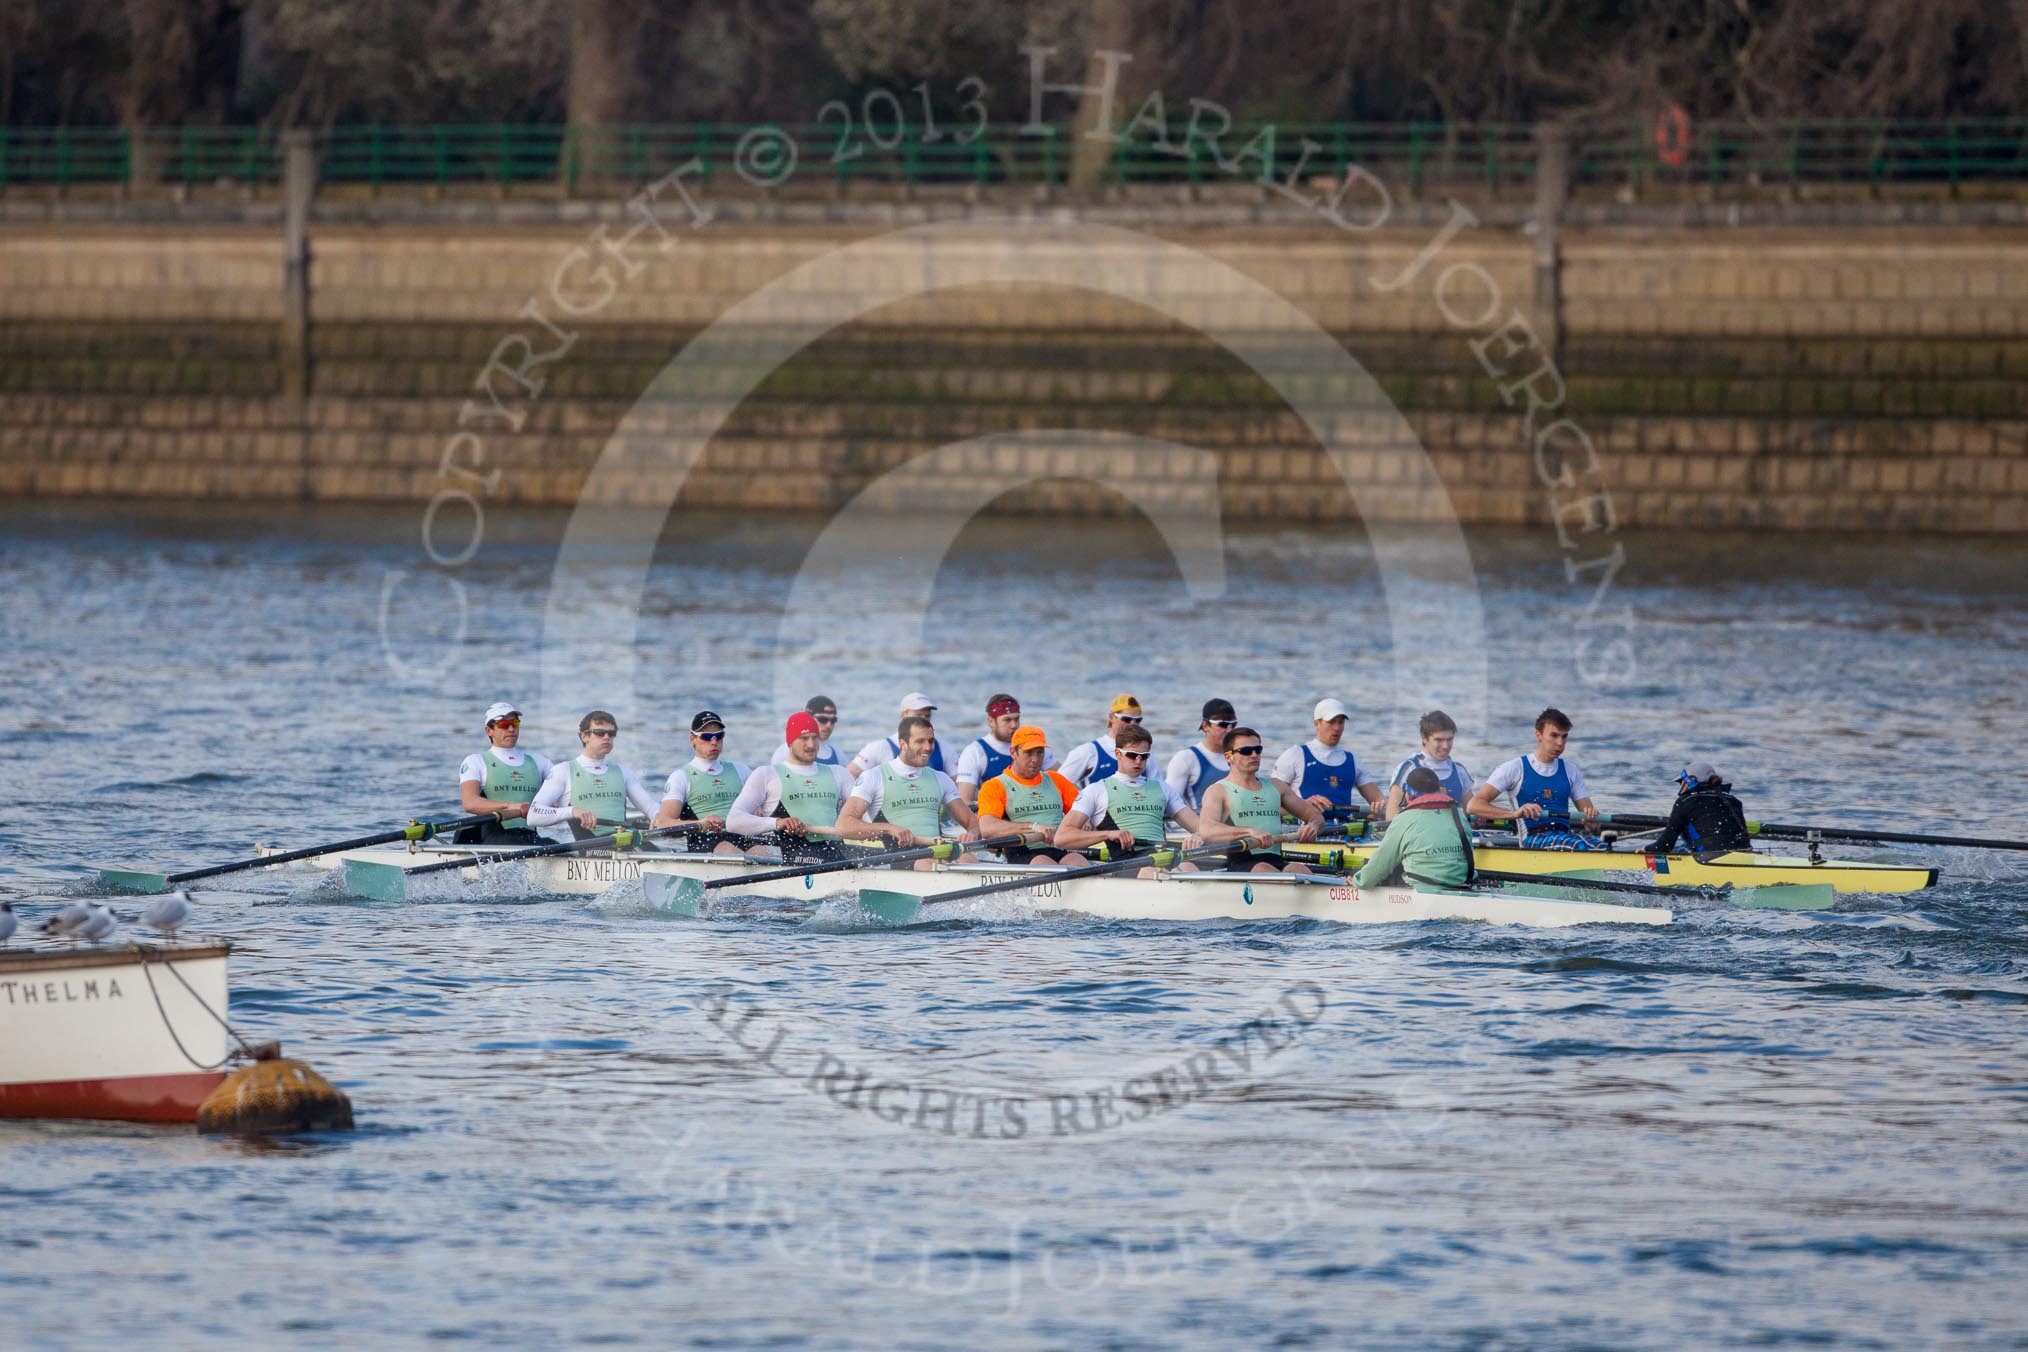 The Boat Race season 2013 - fixture CUBC vs Leander: The Goldie vs Imperial BC fixture..
River Thames Tideway between Putney Bridge and Mortlake,
London SW15,

United Kingdom,
on 02 March 2013 at 15:23, image #55